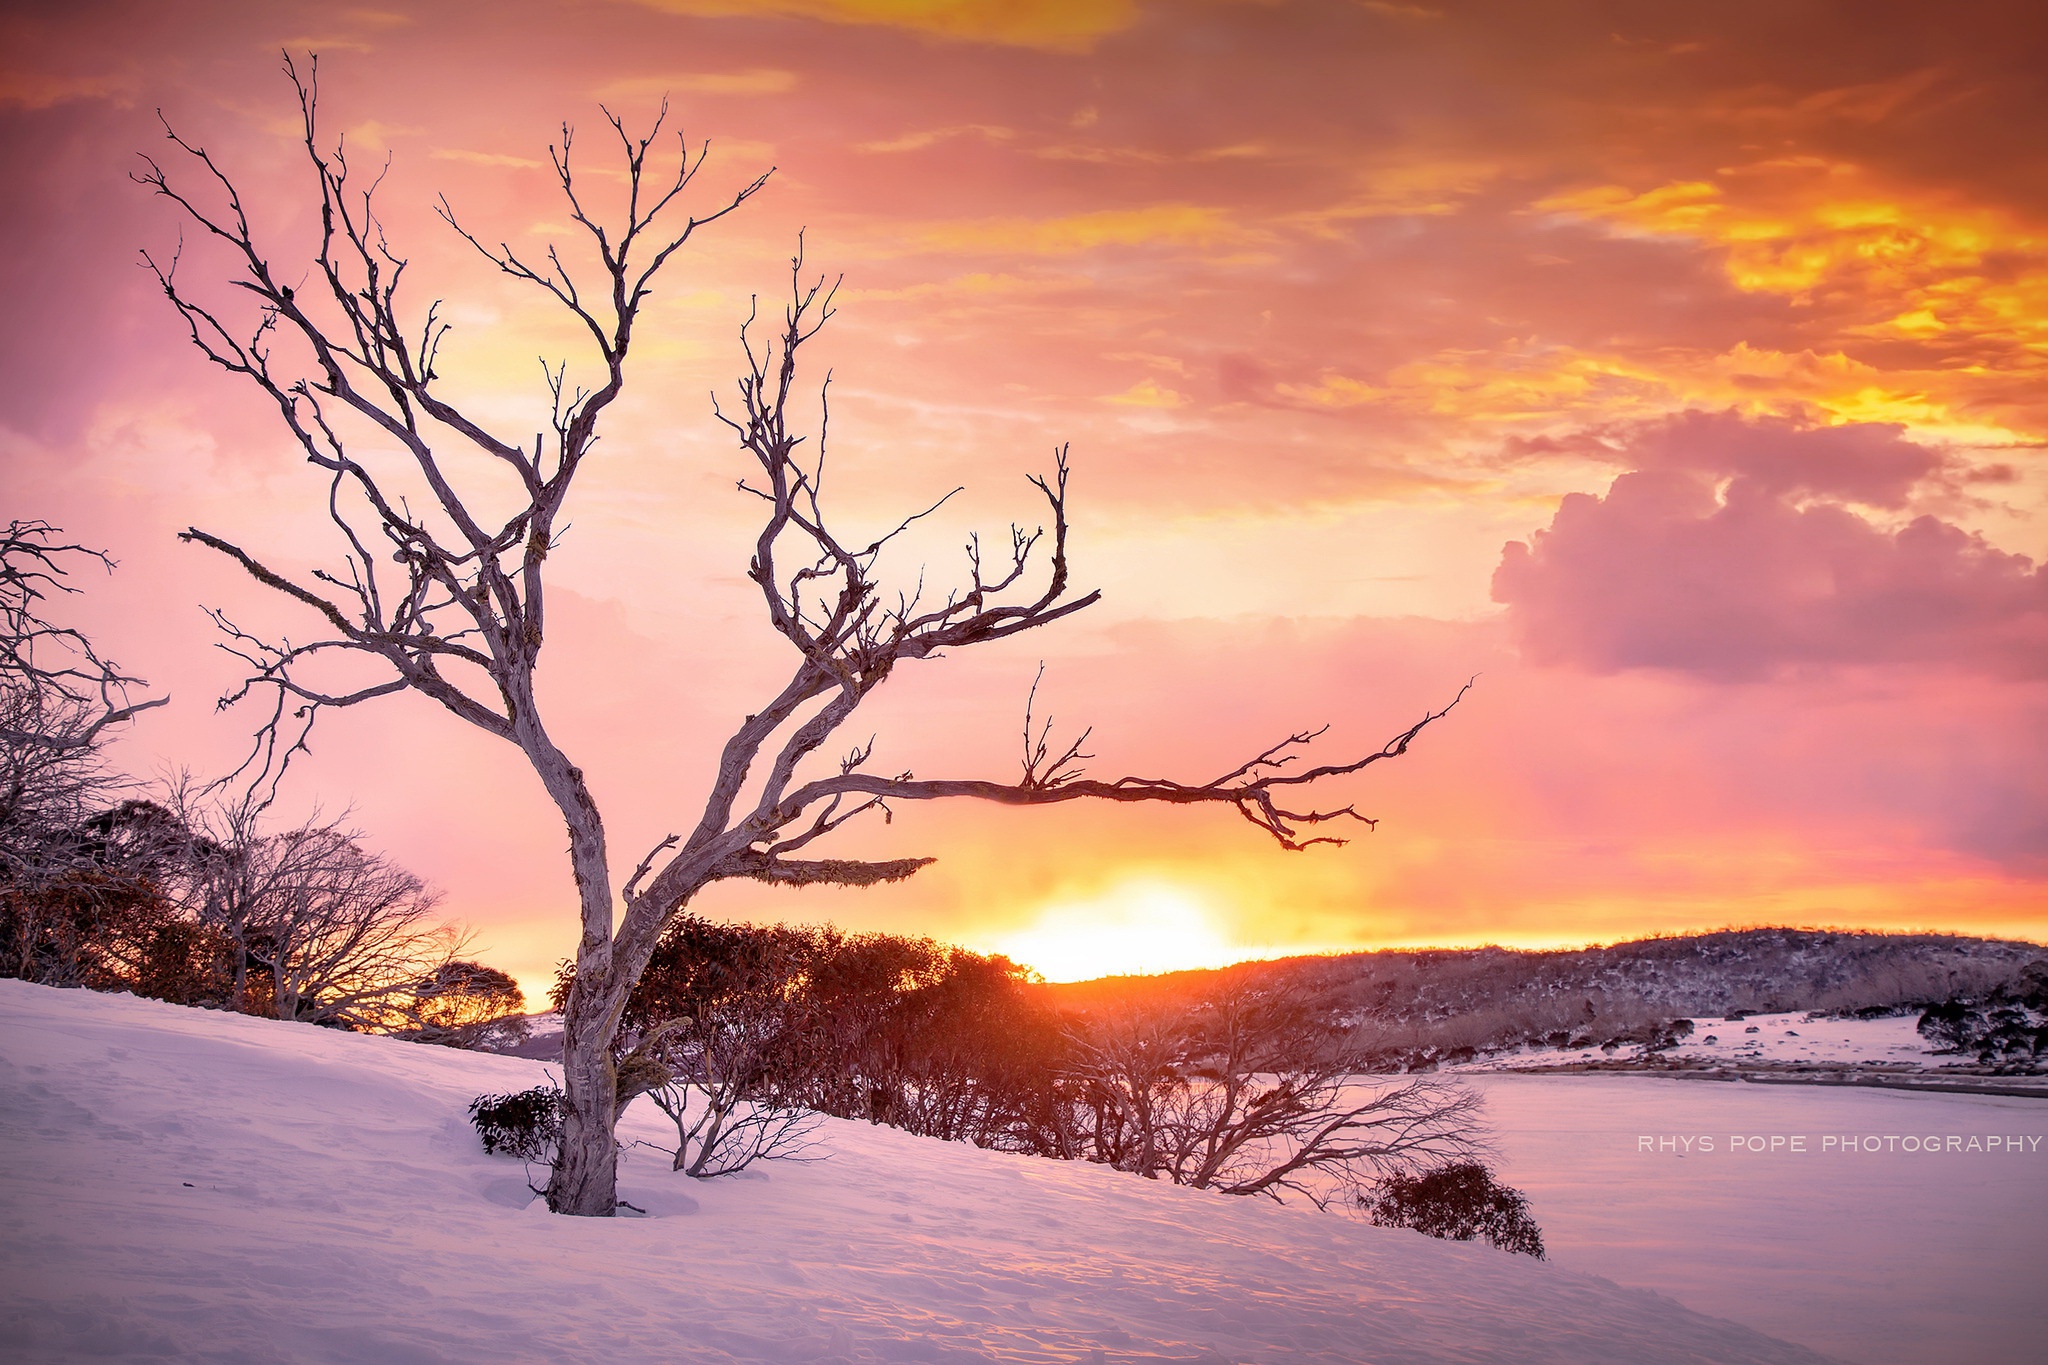 General 2048x1365 sky sunlight winter nature snow colorful landscape orange pink sunset clouds trees